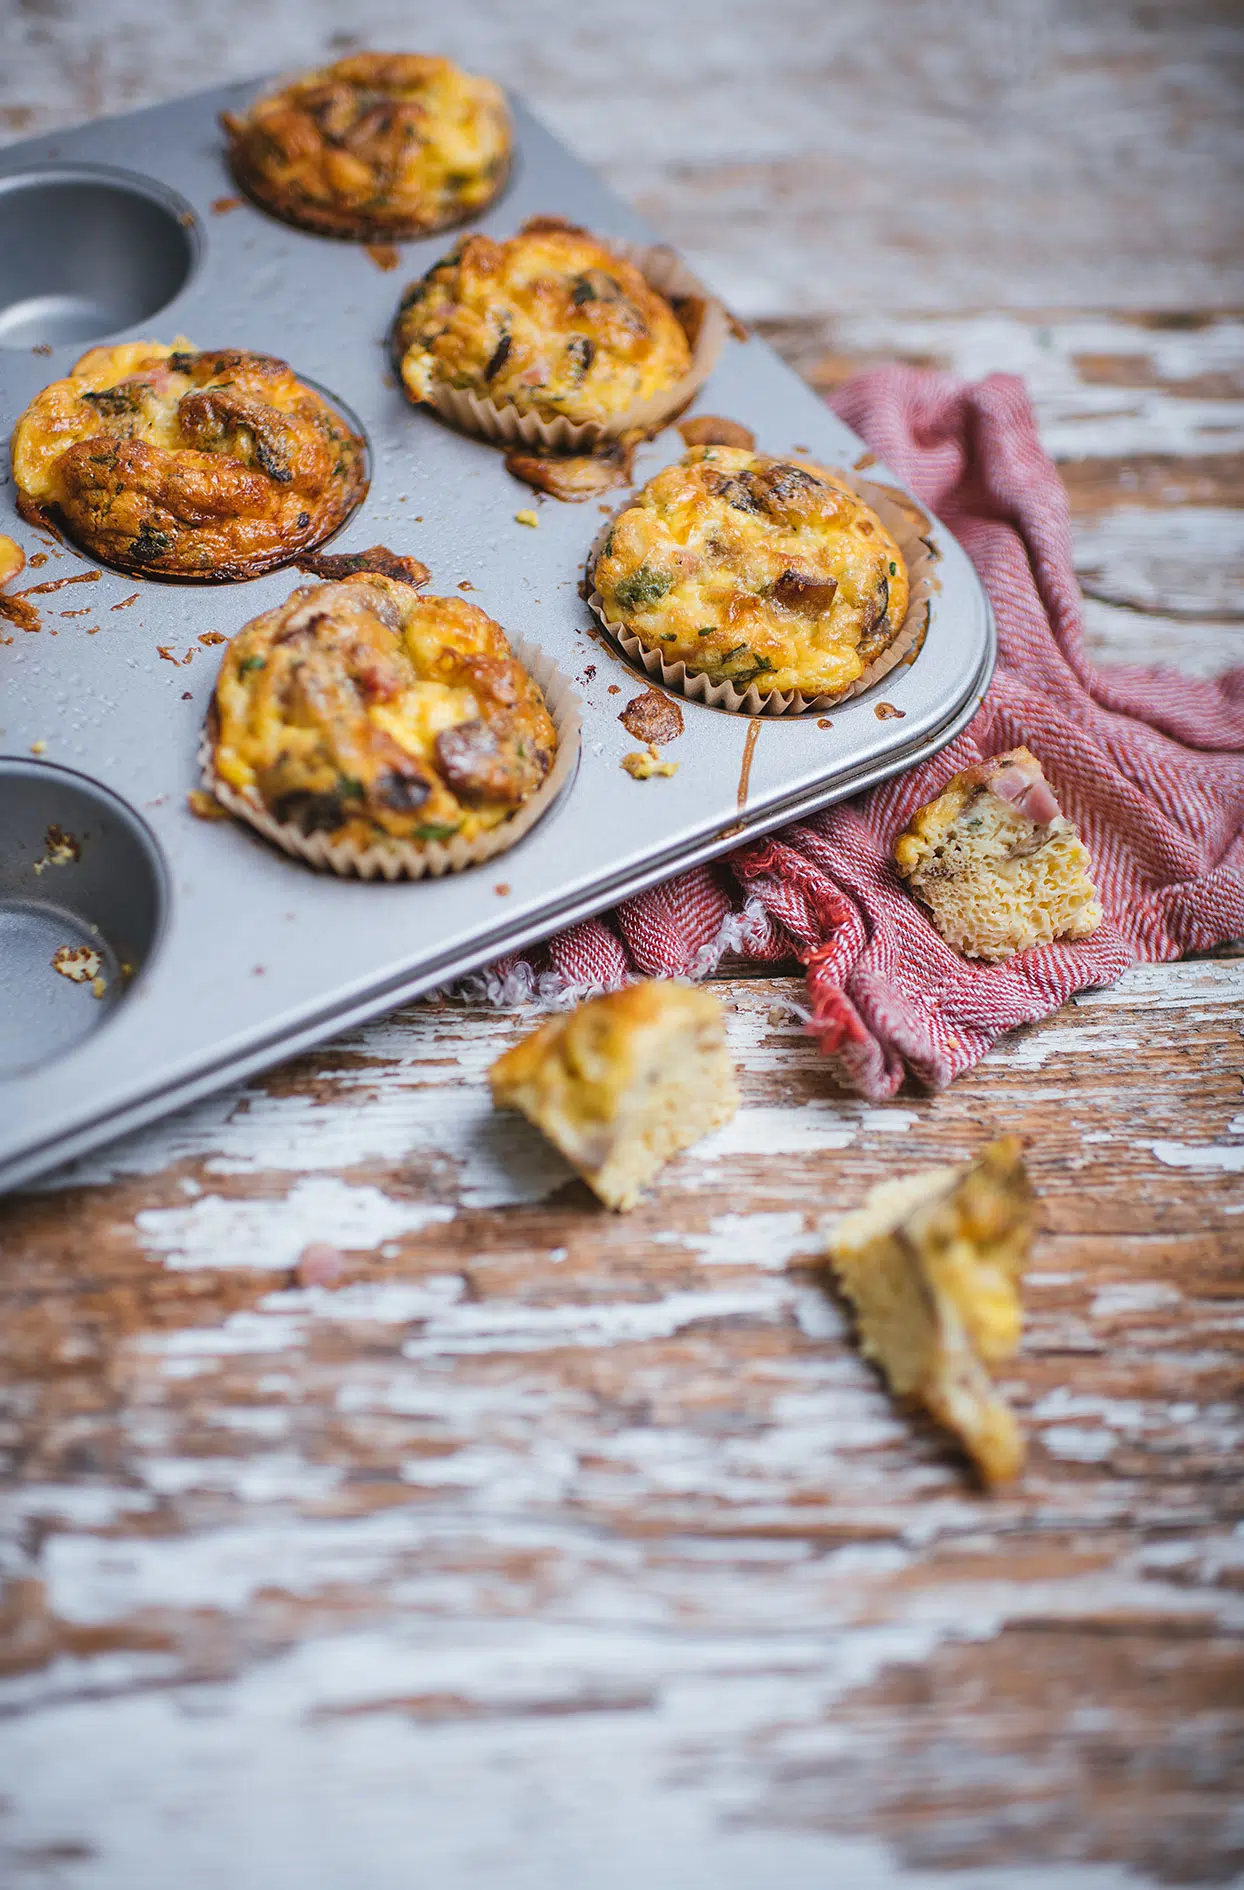 Mini quiches with ham and caramelized onions